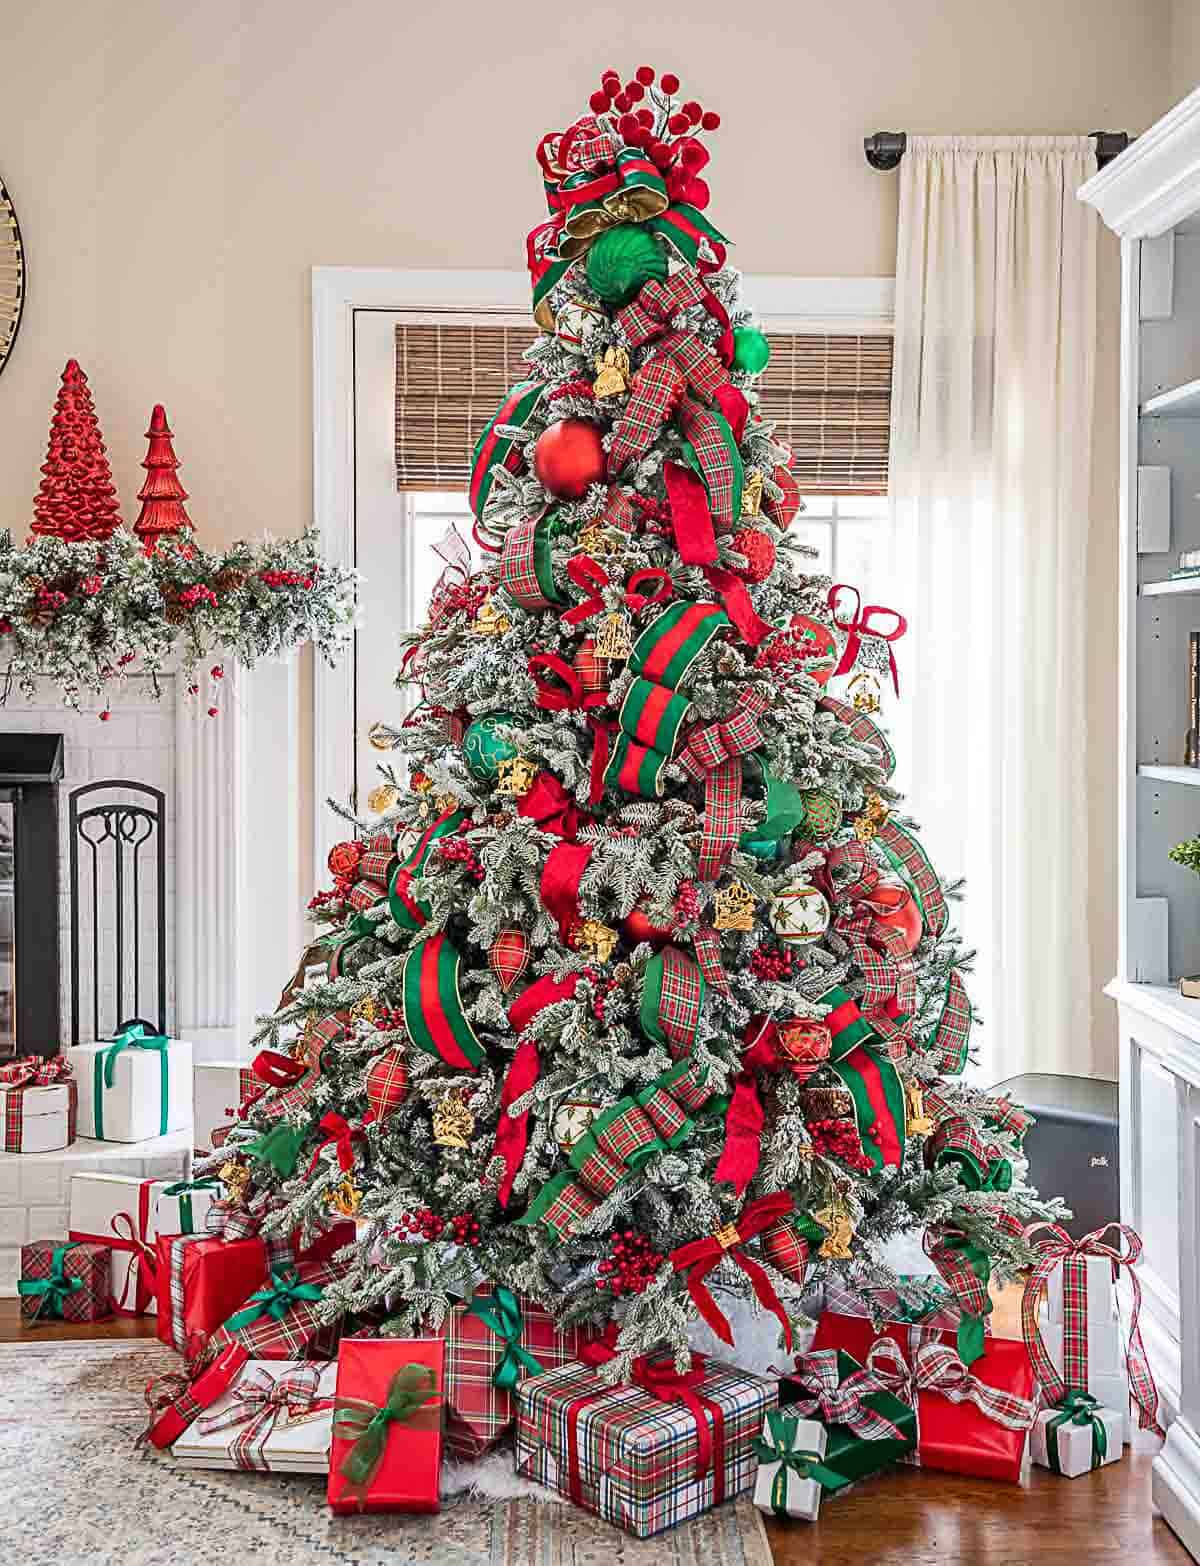 red and green flocked Christmas tree